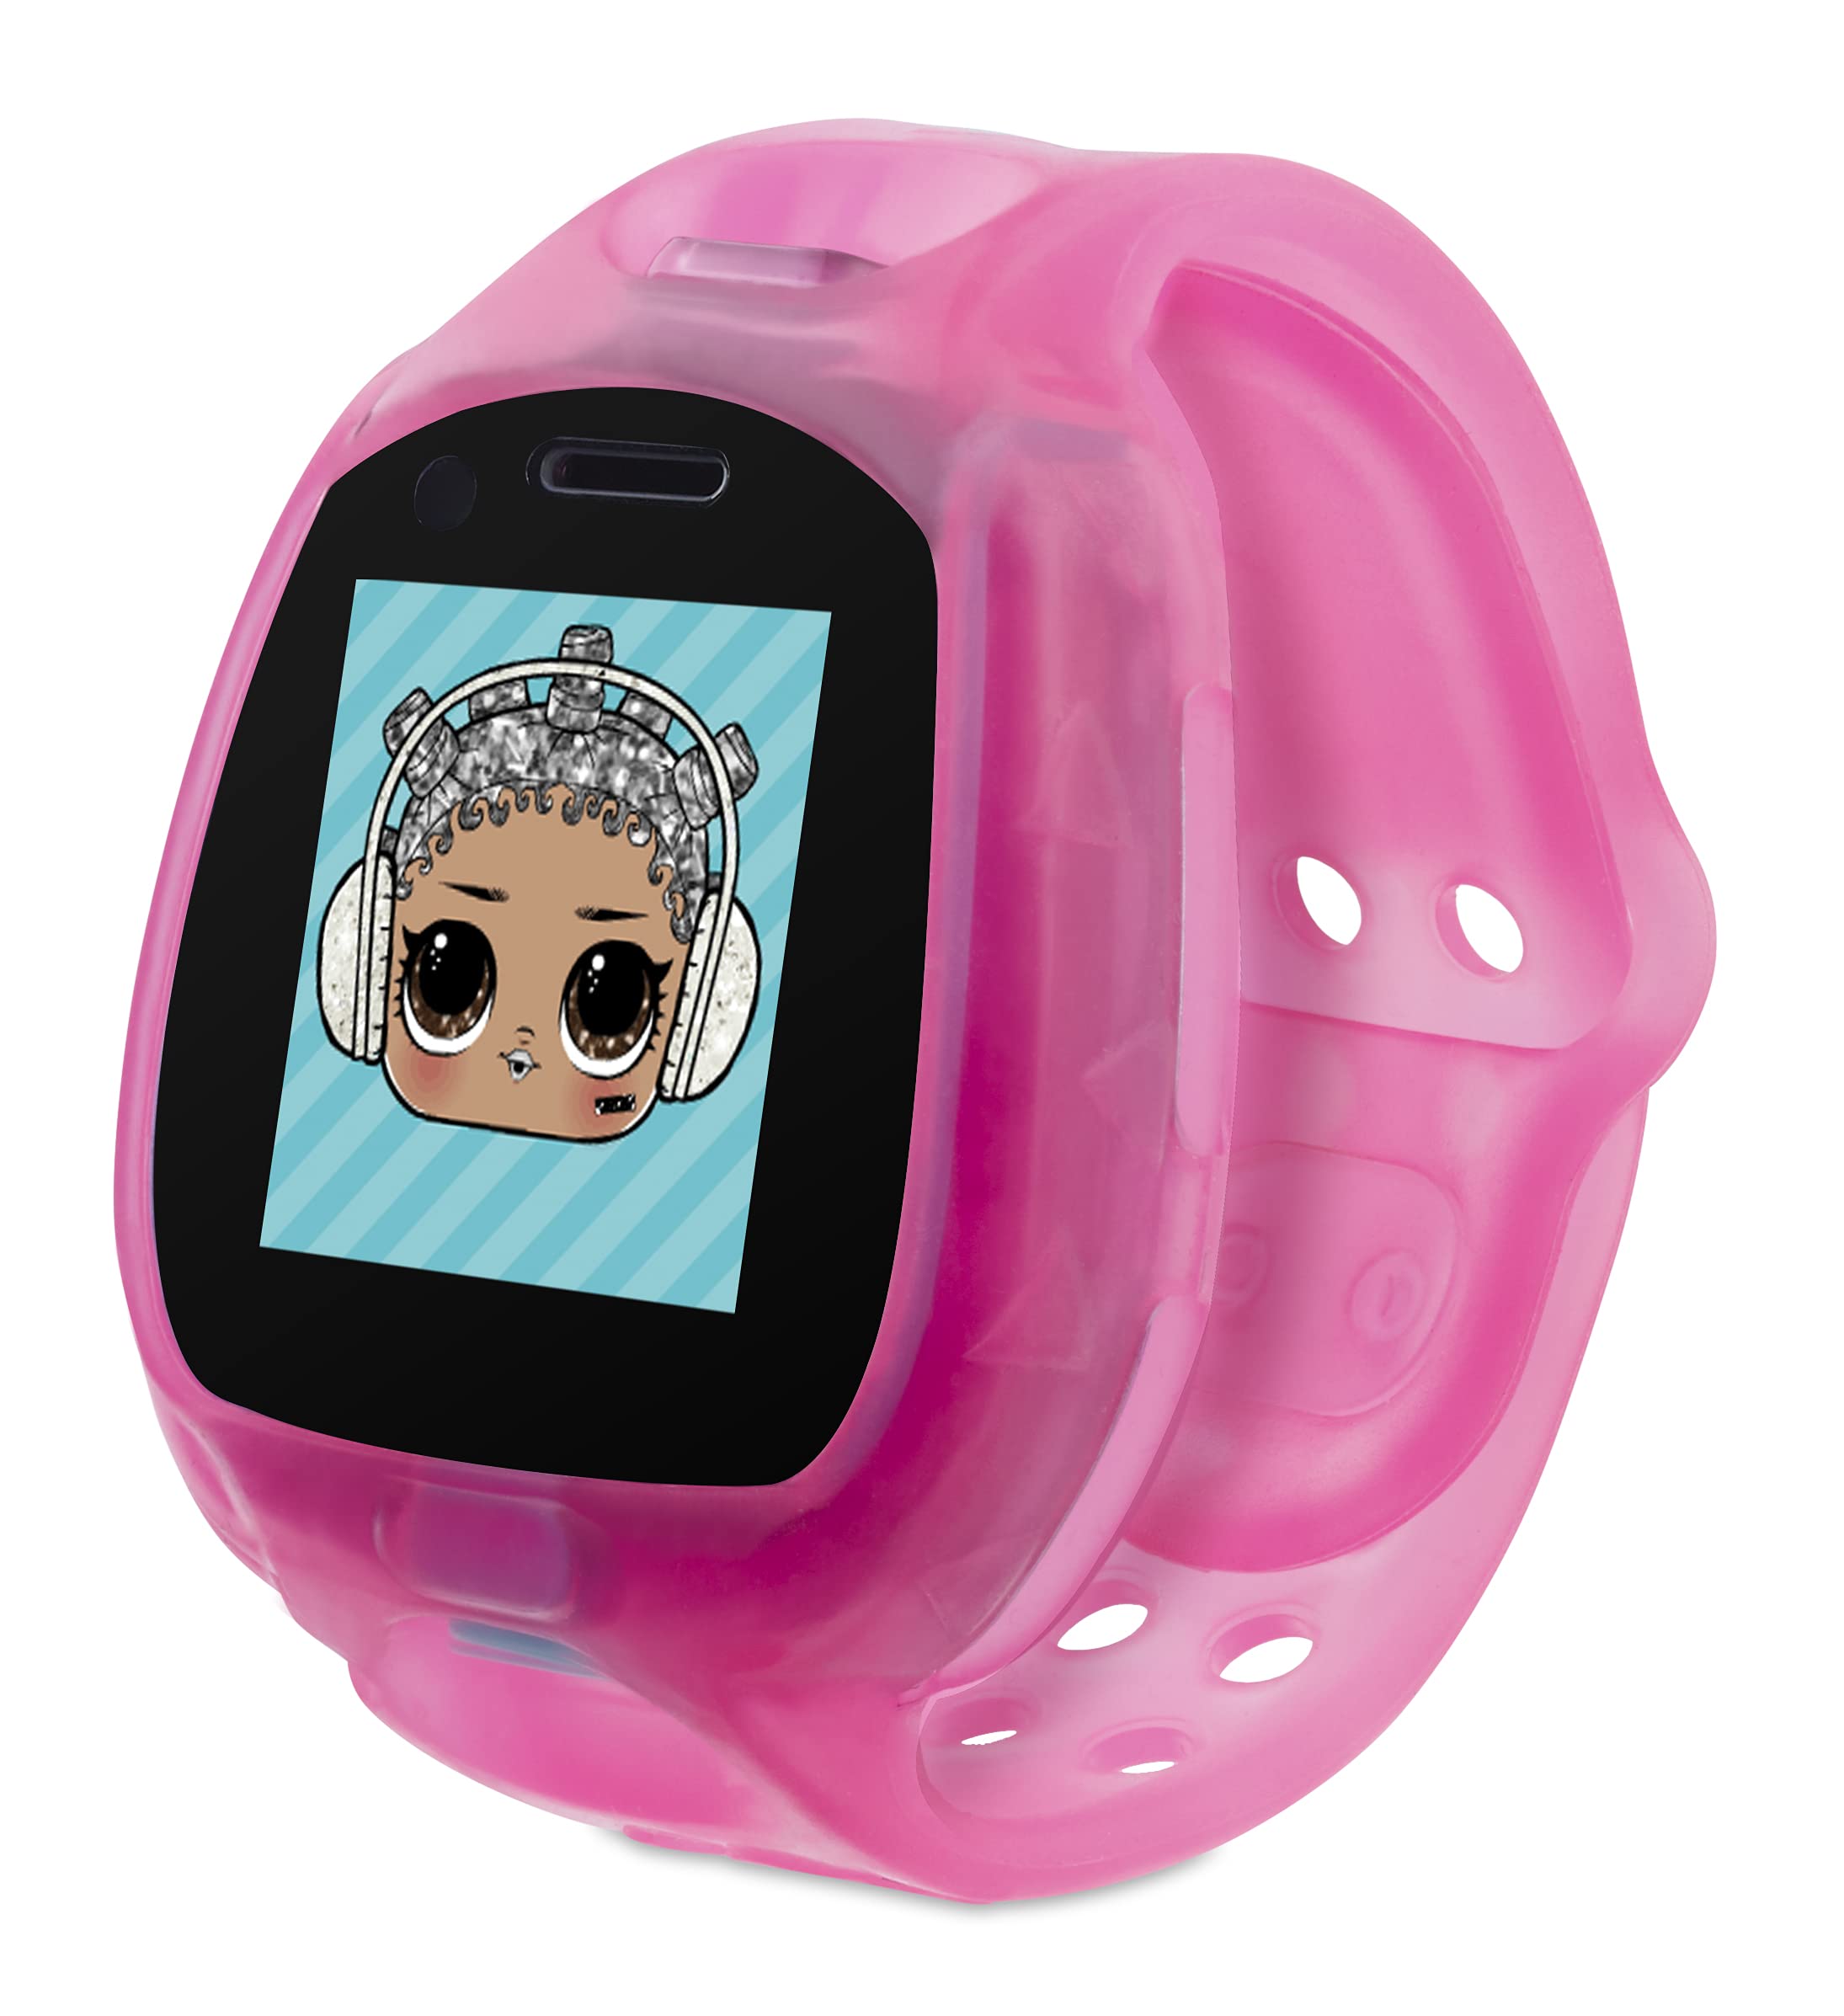 LOL Surprise Smartwatch & Camera 2.0 w Head-to-Head Gaming, Motion-Activated Selfies, Games, Pedometer, Splashproof, Wireless Connectivity, Gift for Kids, Smart Watch for Girls and Boys Ages 4 5 6+